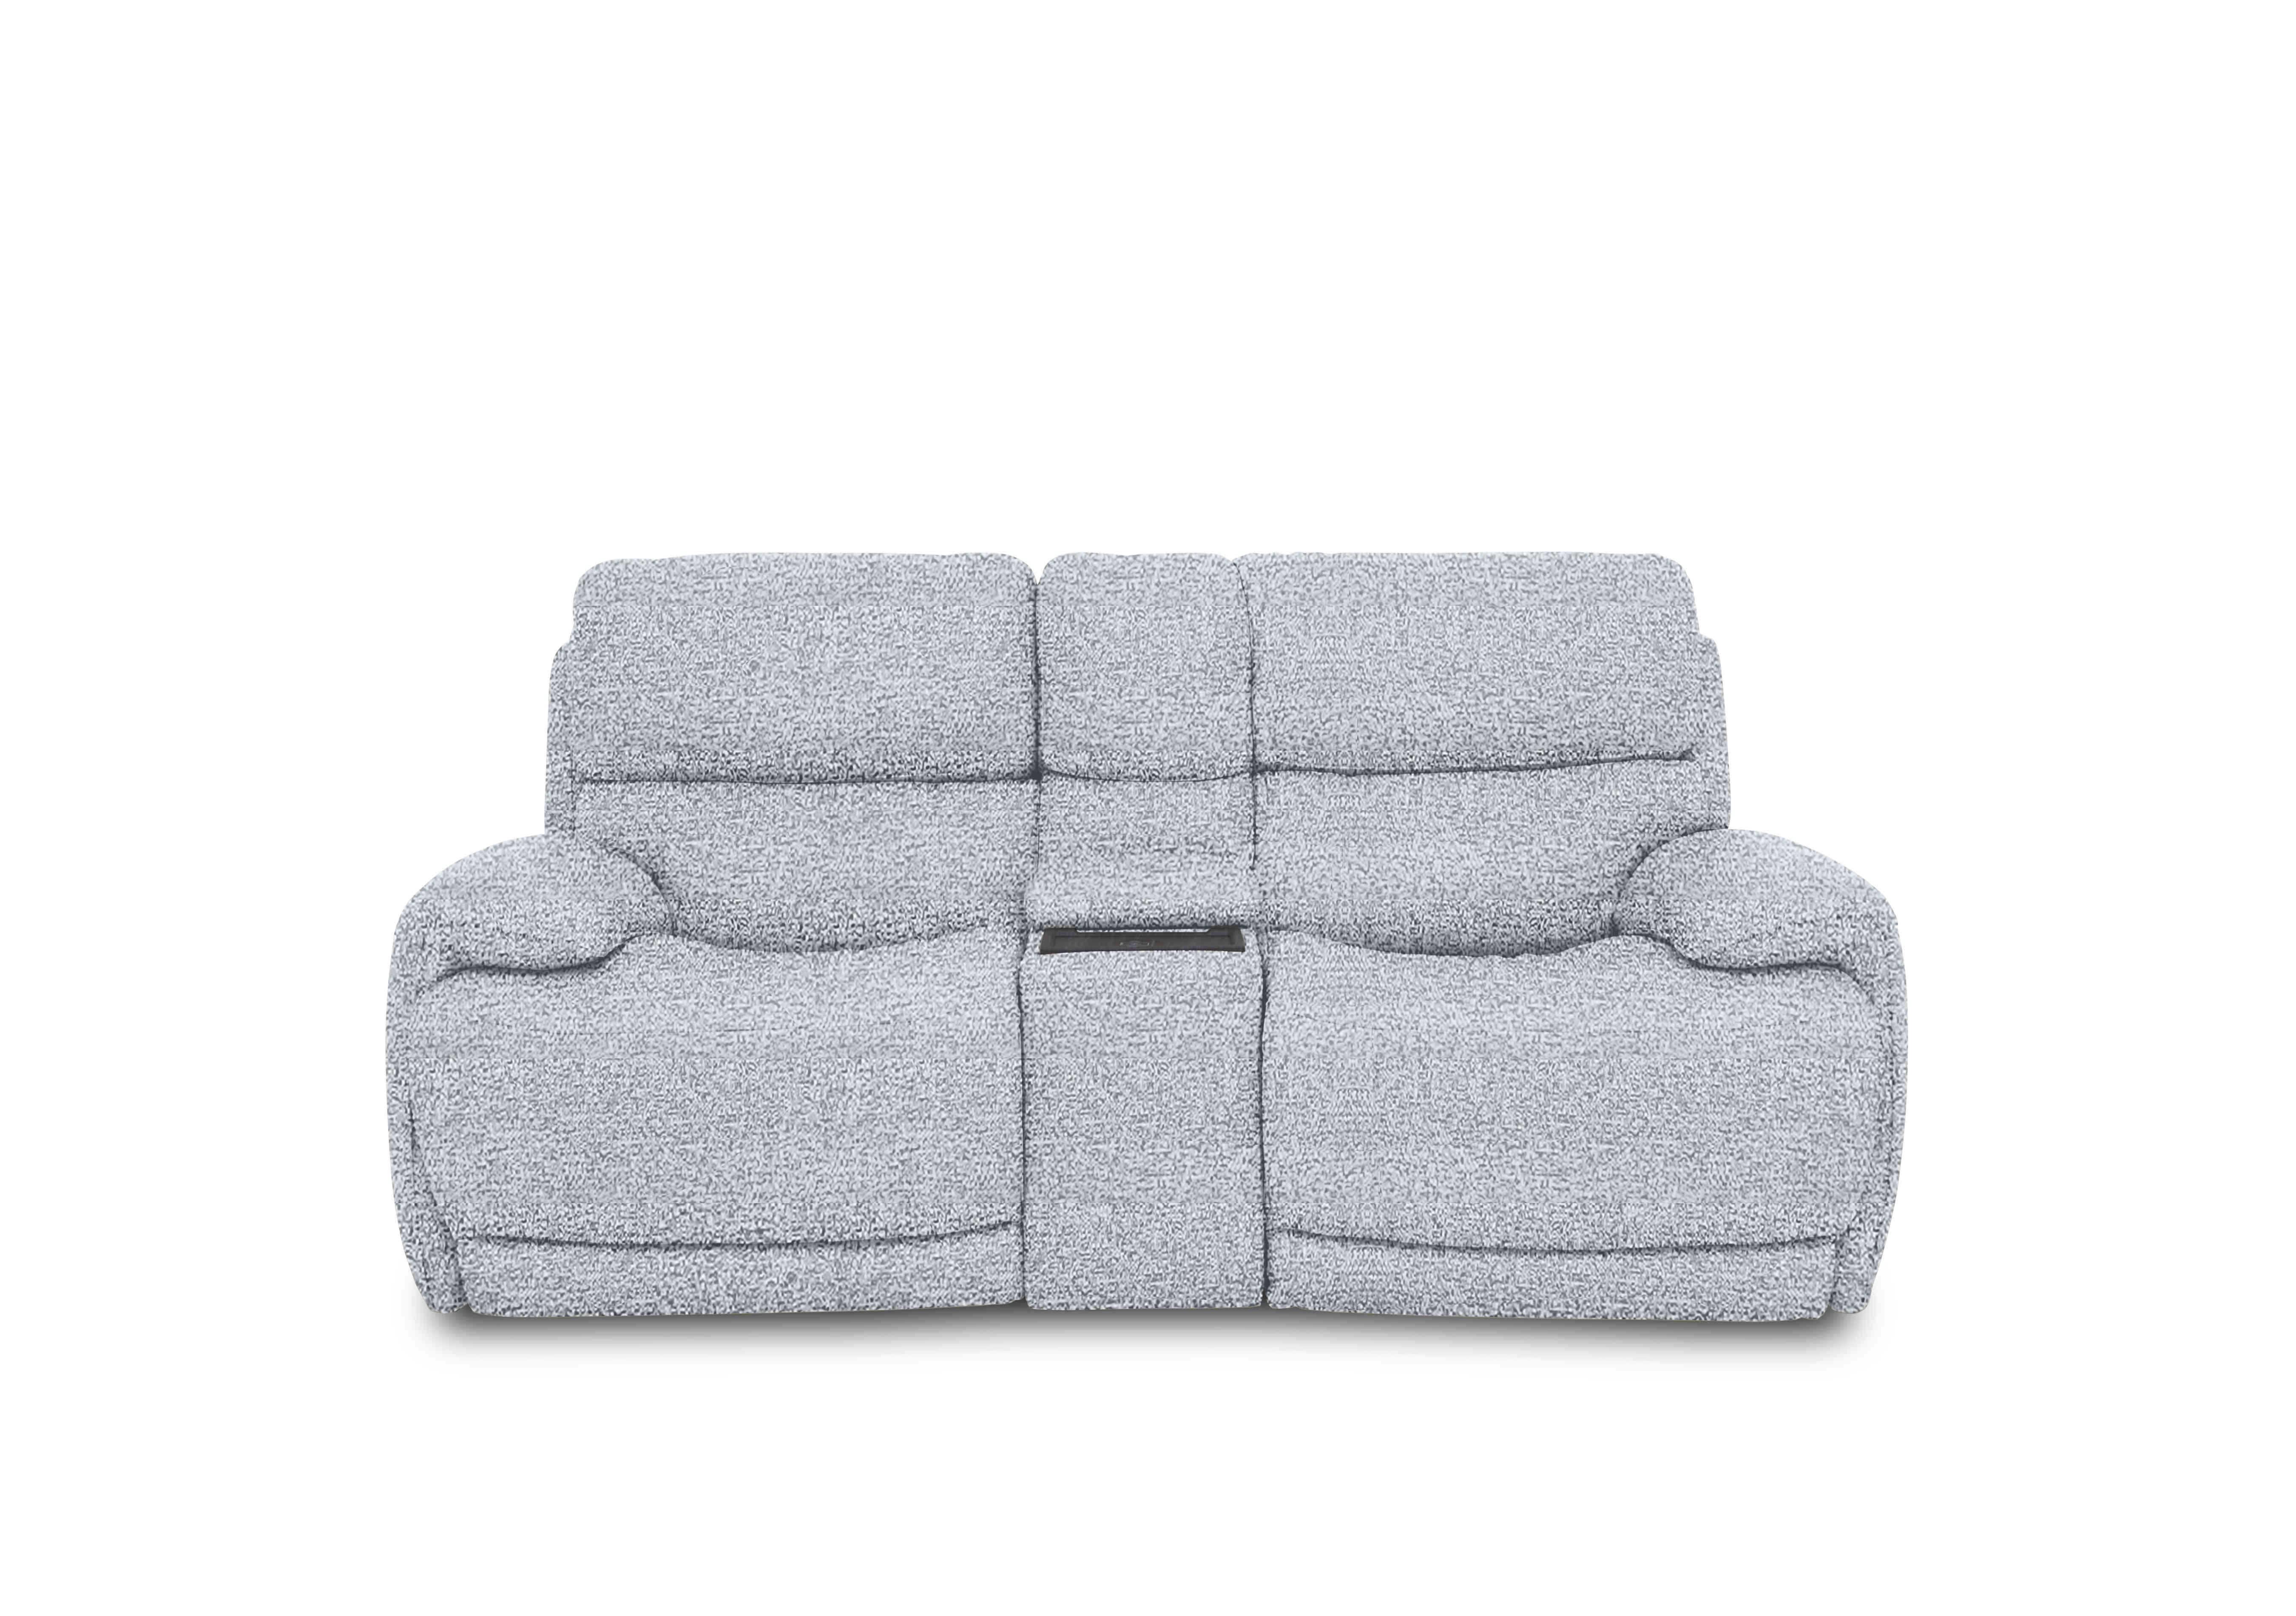 Rocco 2 Seater Fabric Power Rocker Sofa with Cup Holders and Power Headrests in Fab-Chl-R21 Frost on Furniture Village